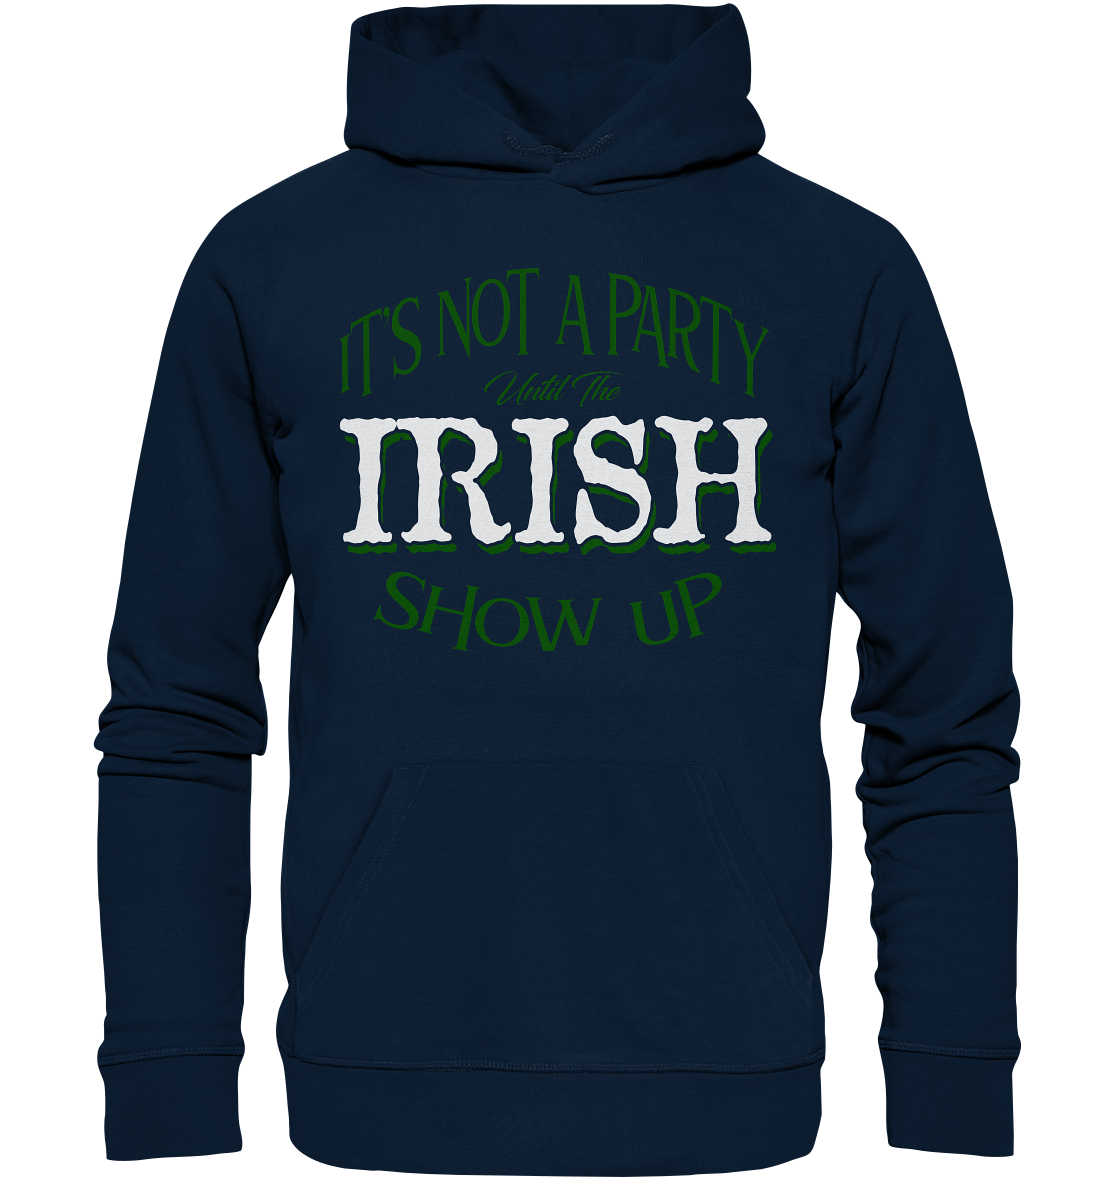 It's Not A Party Until The Irish Show Up - Organic Hoodie